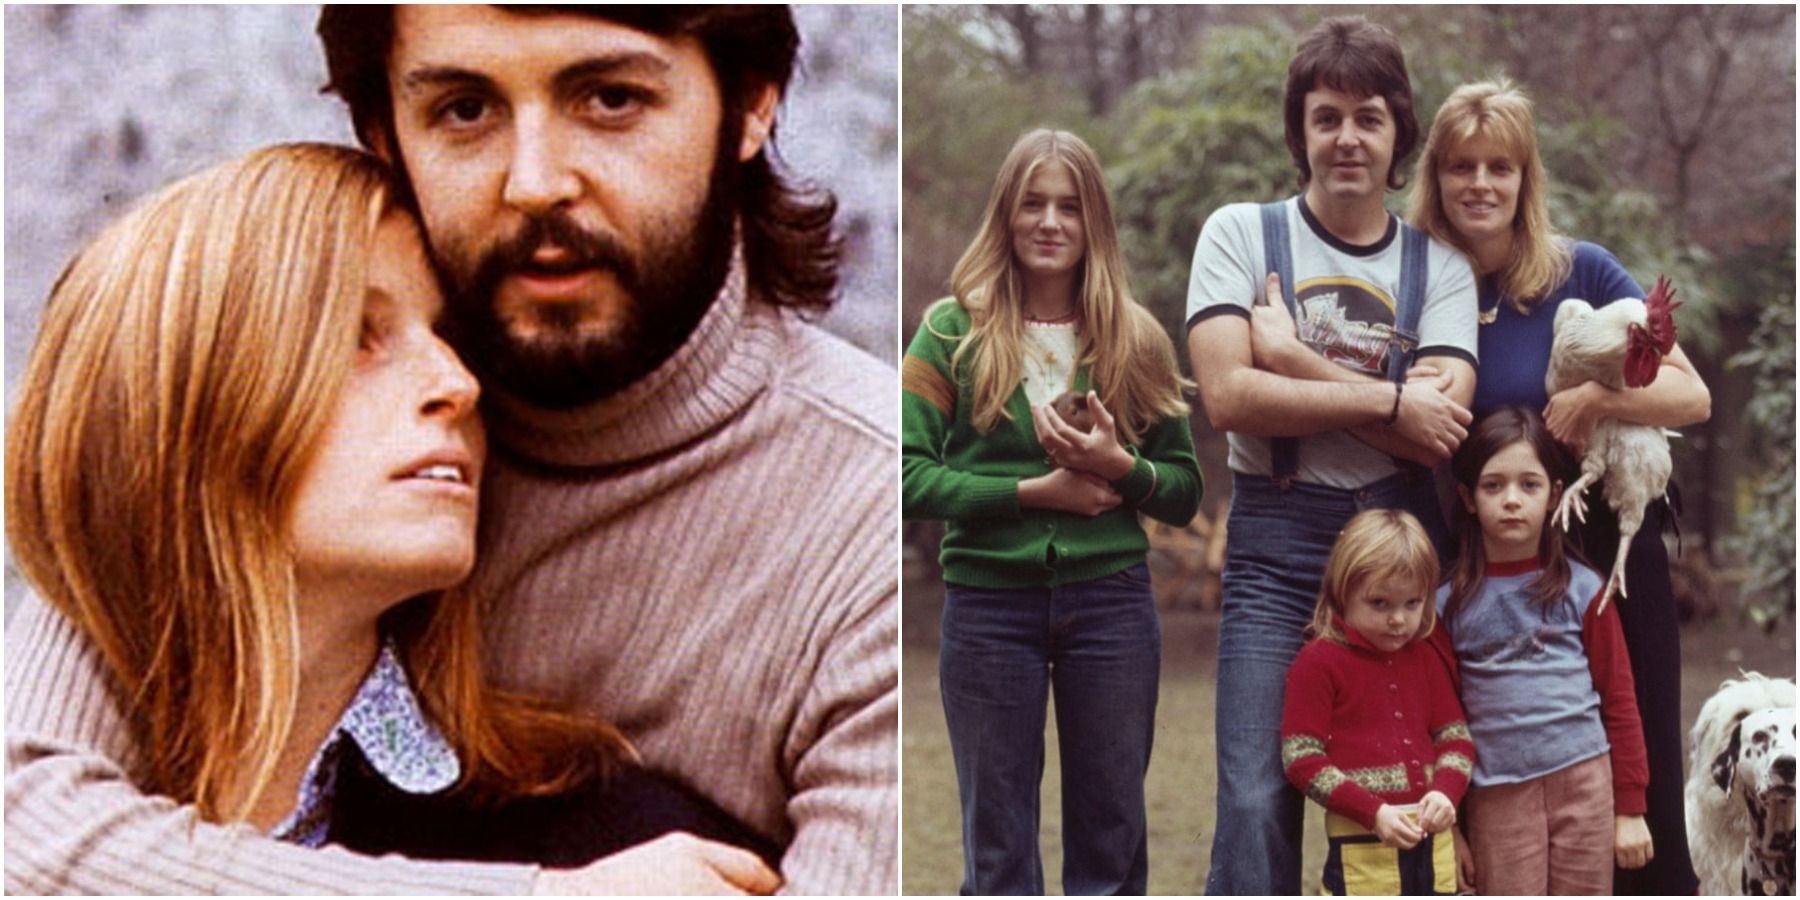 Paul McCartney: 'Linda made me see that I was surrounded by con